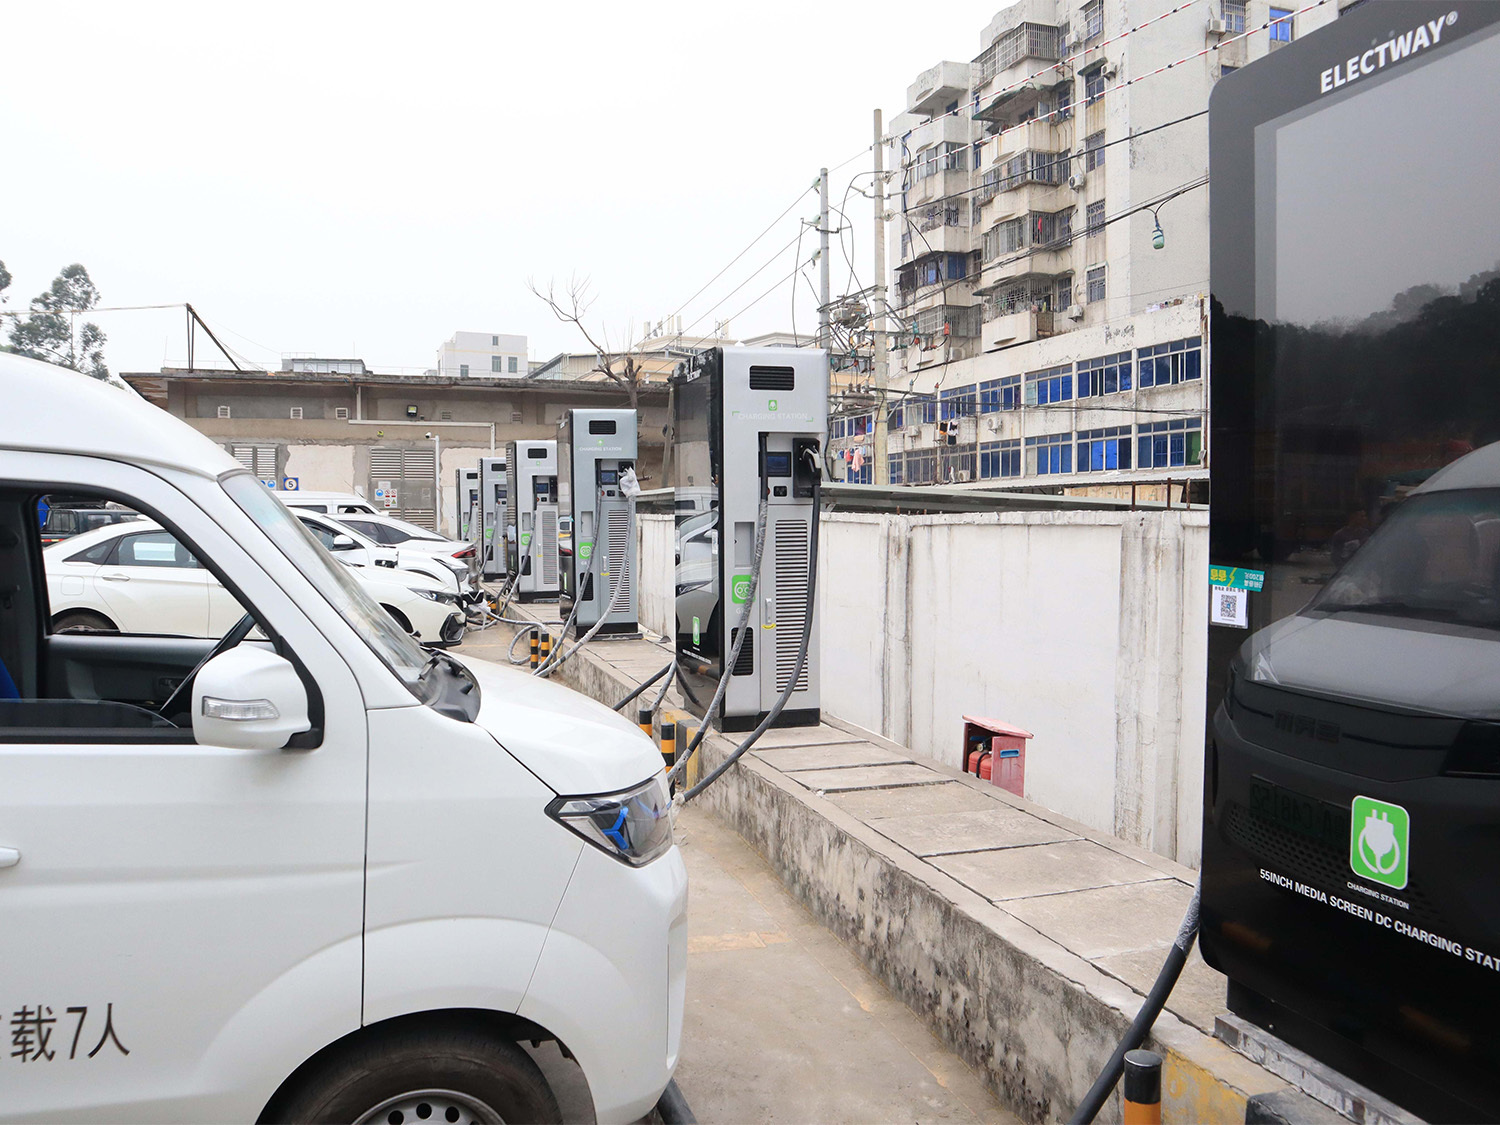 ELECTWAY's Media DC EVSE-Dual Socket/Dual Plug was successfully used in Panyu Charging Station, Panyu District, Guangzhou